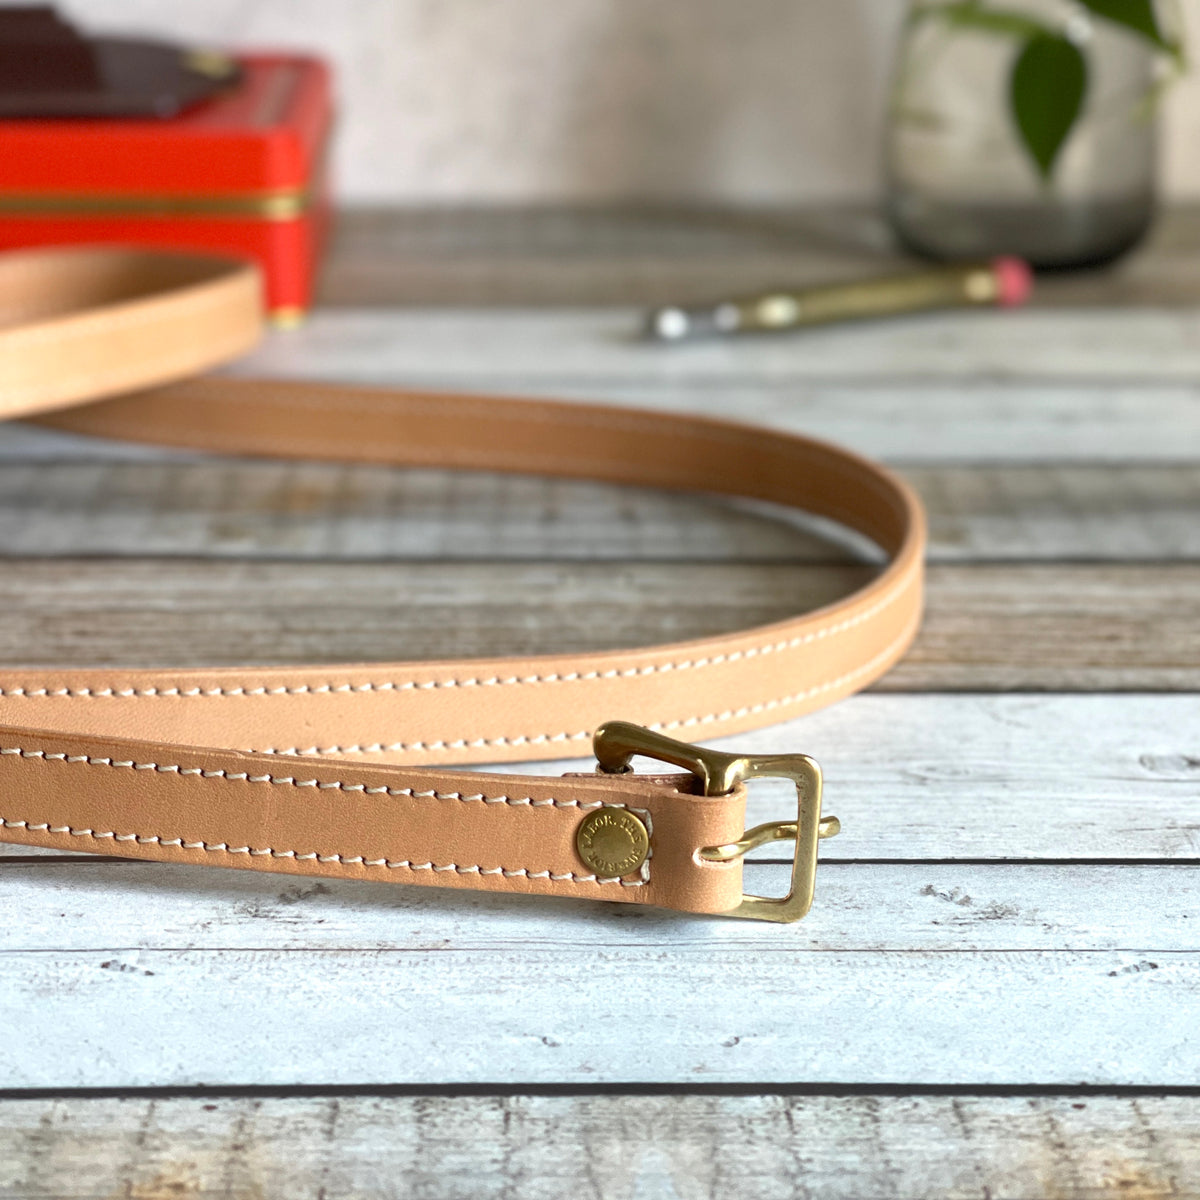 Handcrafted Vachetta Leather Shoulder Strap Replacement 